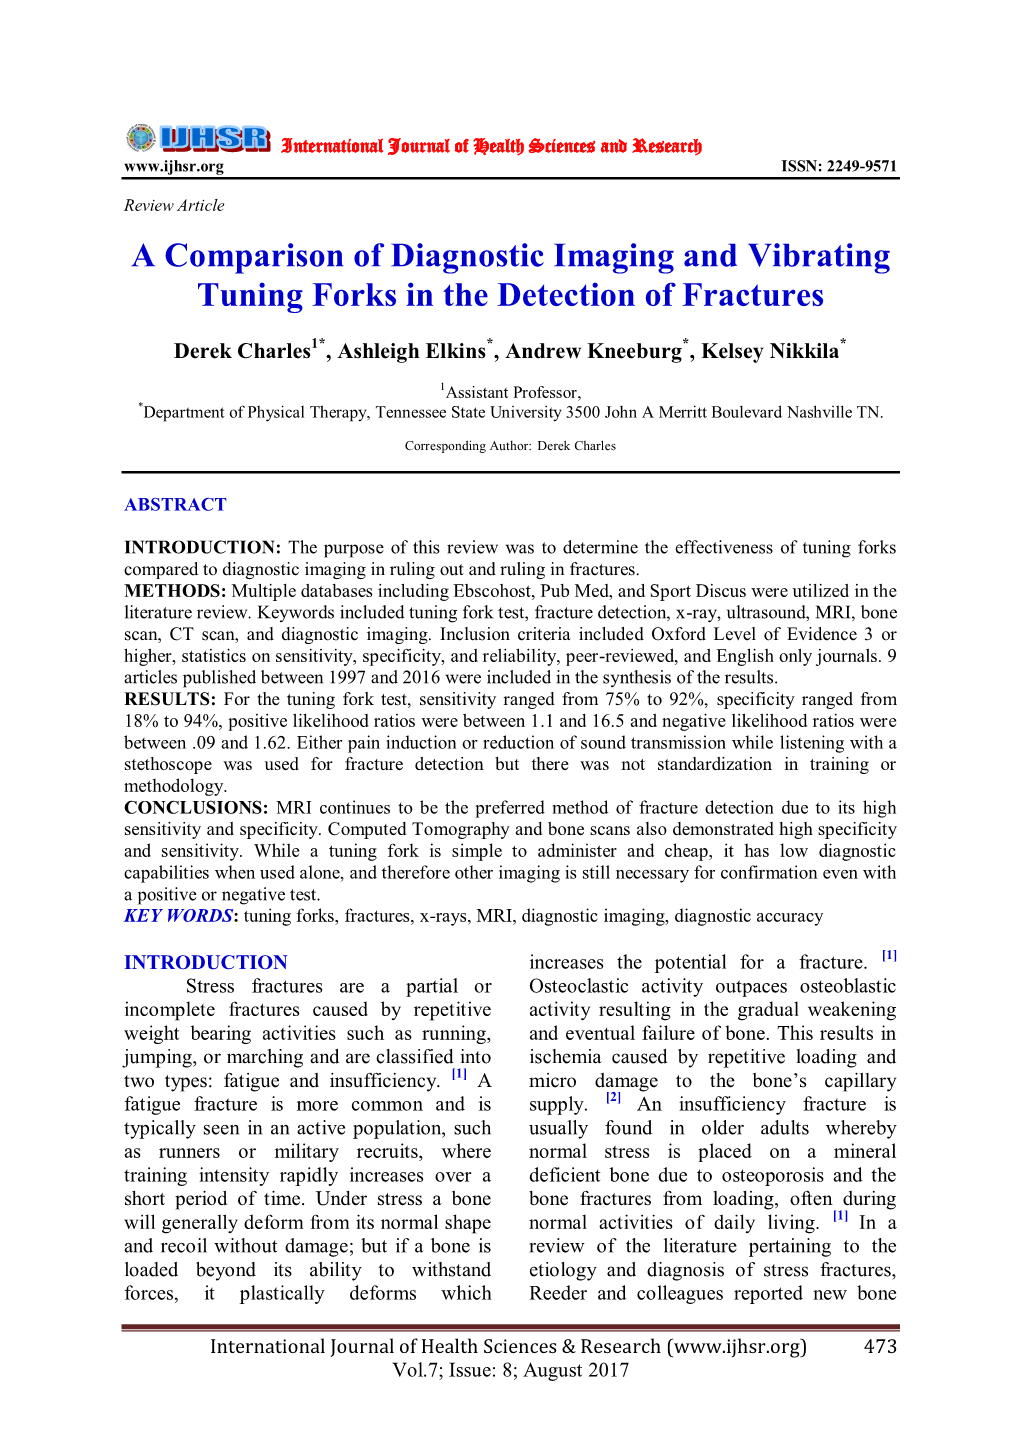 A Comparison of Diagnostic Imaging and Vibrating Tuning Forks in the Detection of Fractures